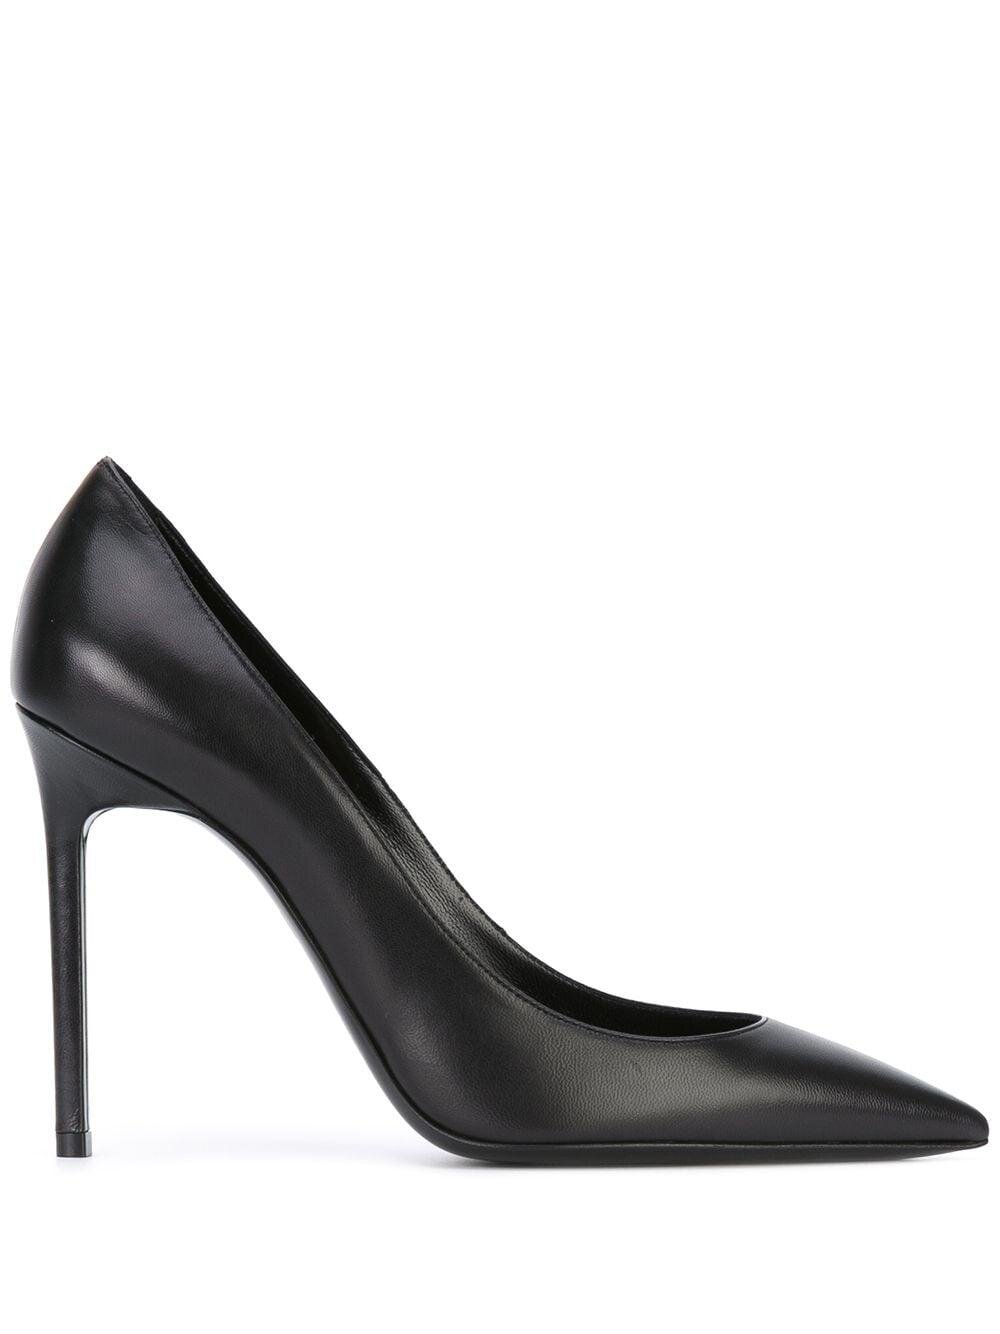 Saint Laurent Anja D'Orsay Court Shoes in Black Patent Leather — UFO No ...